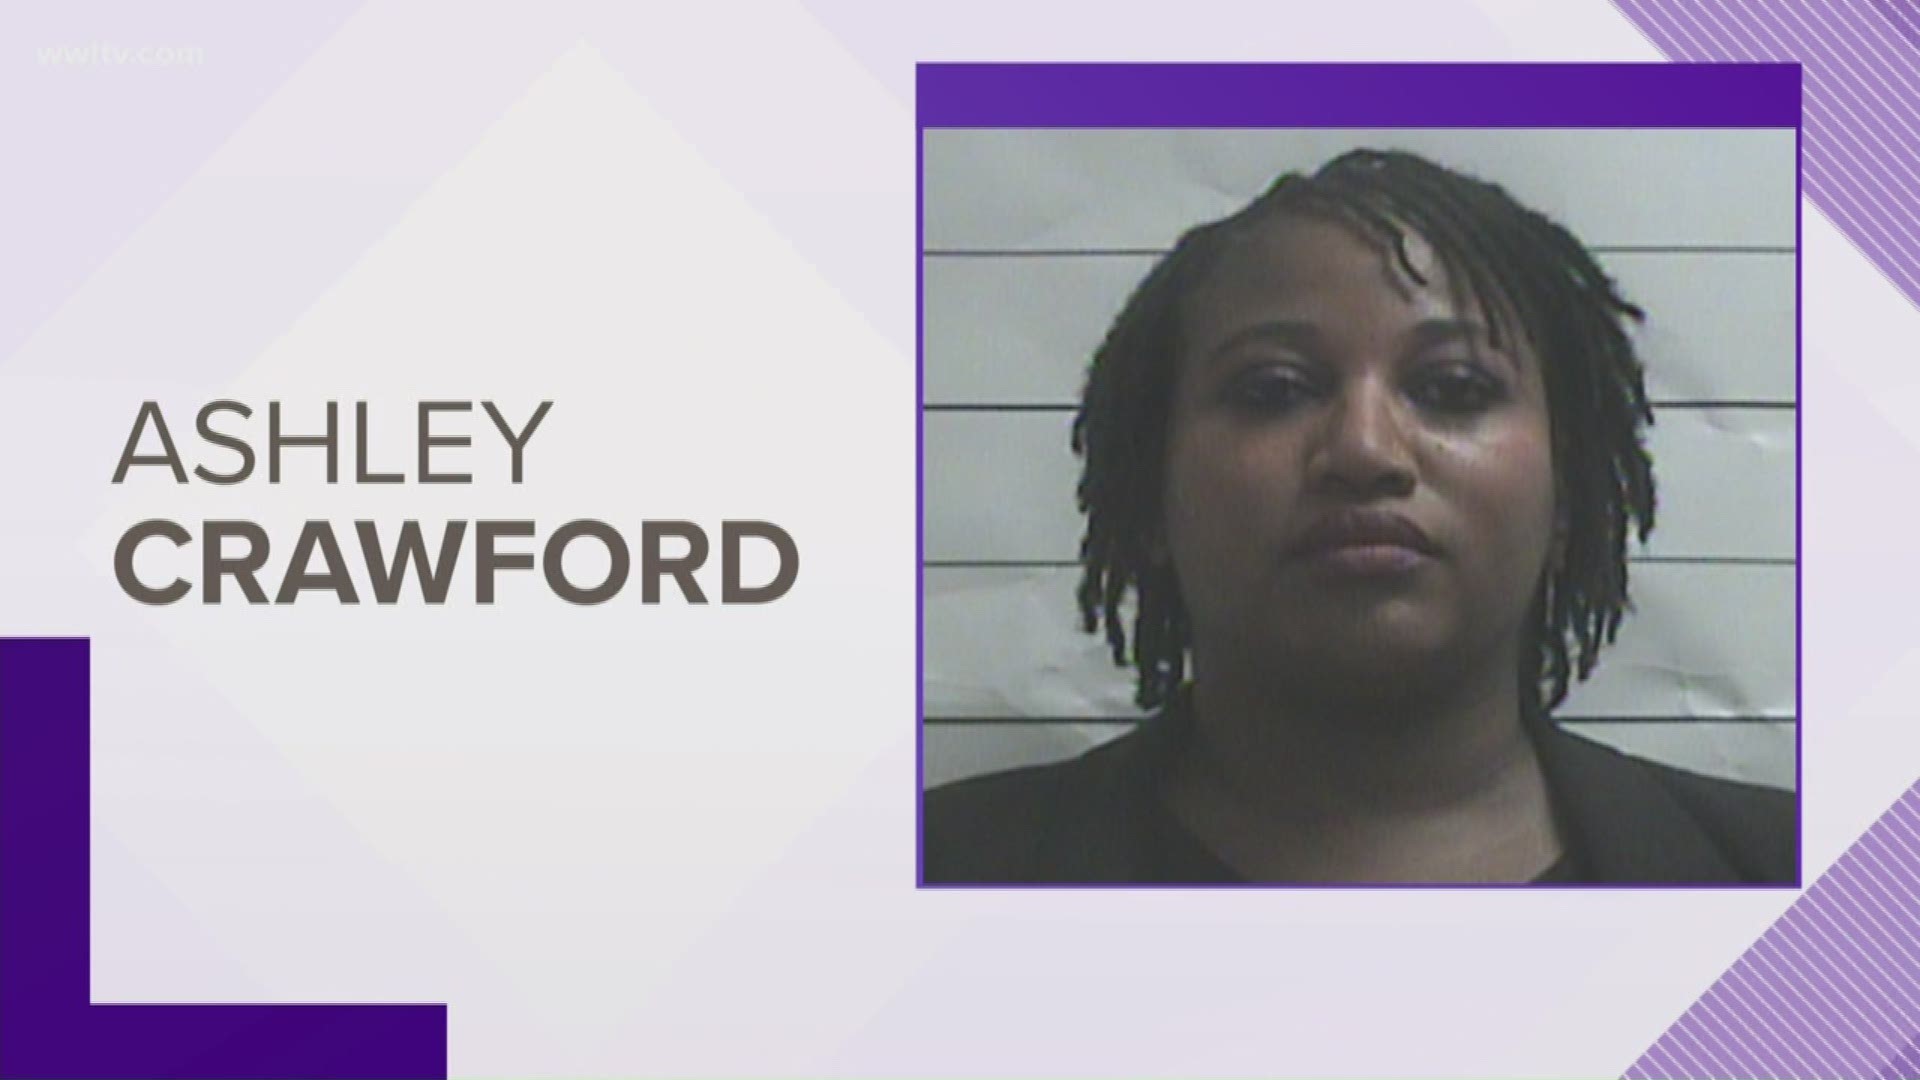 Former Orleans public defender Ashley Crawford, fired in June after being exposed as working without a law license, was booked Friday with several felonies based on a trail of deceit and forgery she allegedly used to get hired, court records show.